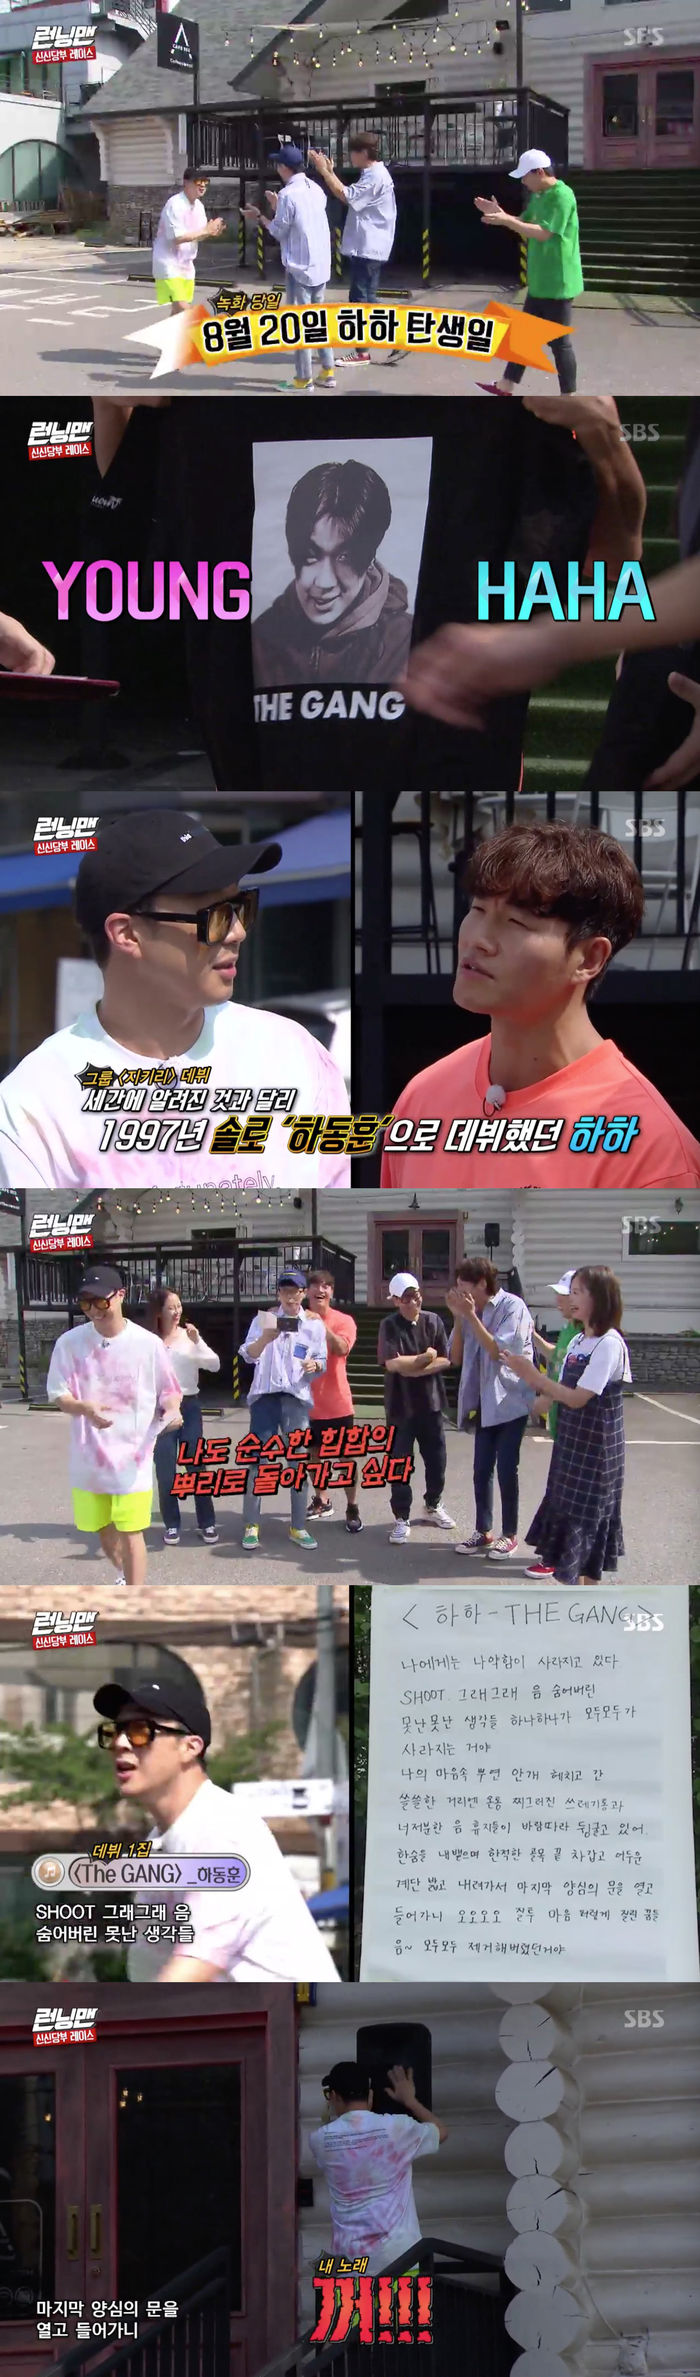 Haha had a special birthday.On SBS Running Man broadcasted on the 1st, special events of members for Haha who celebrated their birthday were revealed.On this day, the members gave a birthday greeting to Haha, who was the birthday of the recording day.At this time, the production team attracted attention by adding the subtitle stable 40s to Haha, who was 40 years old.The production team then released Goods, which included photos of the members, saying, We are approaching a week before the Running Man meeting.The production team also said, And there is one more T-shirt to introduce.The T-shirt was printed with a picture of Haha, who debuted as a singer in 1997 under the name Ha Dong-hoon. Haha was excited to say, Why do you disclose this?The production team said, The employees of a small but strong company asked me to do it. Hahas debut album cassette tape and CD were also revealed.Yoo Jae-Suk read Hahas comments on his album down.Haha said, Ha Dong-hoons Music has a trembling and a joy of Jeonyul in a deep soul.I also want to return to the roots of pure Hip hop. The production team even released his debut title song; the lyrics, which contained his adolescent sensibility at the time of the upheaval, drew laughter; Haha said, Dont listen.Please turn it off, he fussed.But the members teased Haha, noting that: Hip hop is rap music, boldly putting my face on the world.The rhythm of Hip hop is approaching now, he said, reading Hahas comments on the album to the end and making him devastated.